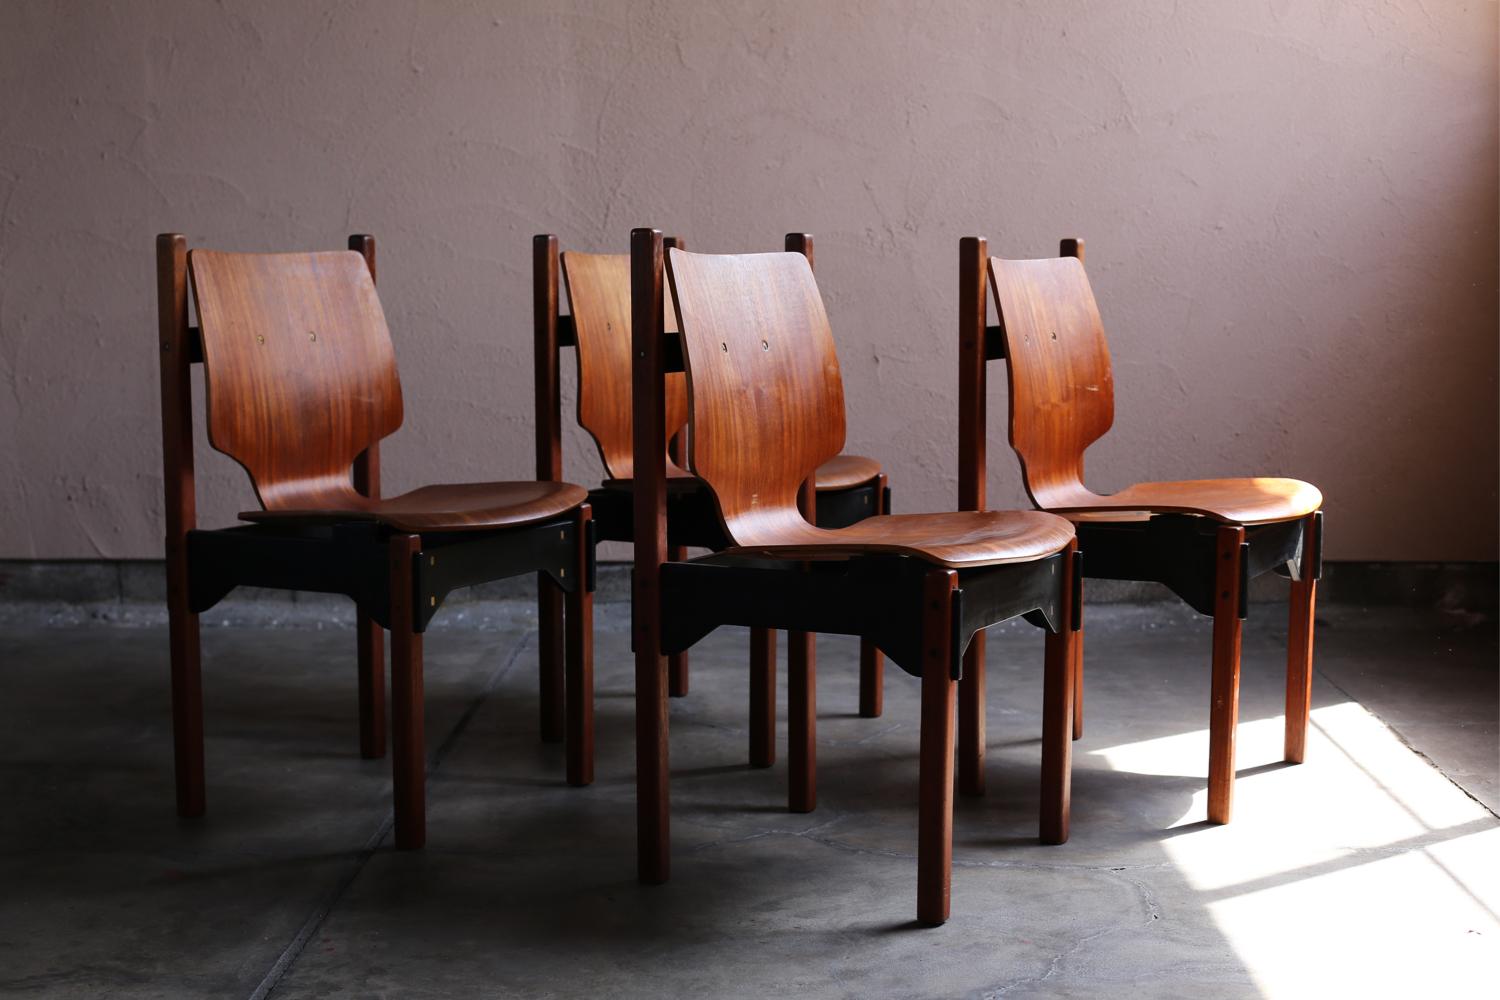 A set of 4 vintage design chairs made in Denmark.
There is a brass handle on the back of the plywood seat.
The parts that connect the legs are also decorated.
We don't know the designers of these chairs. But we think these designs are very nice.